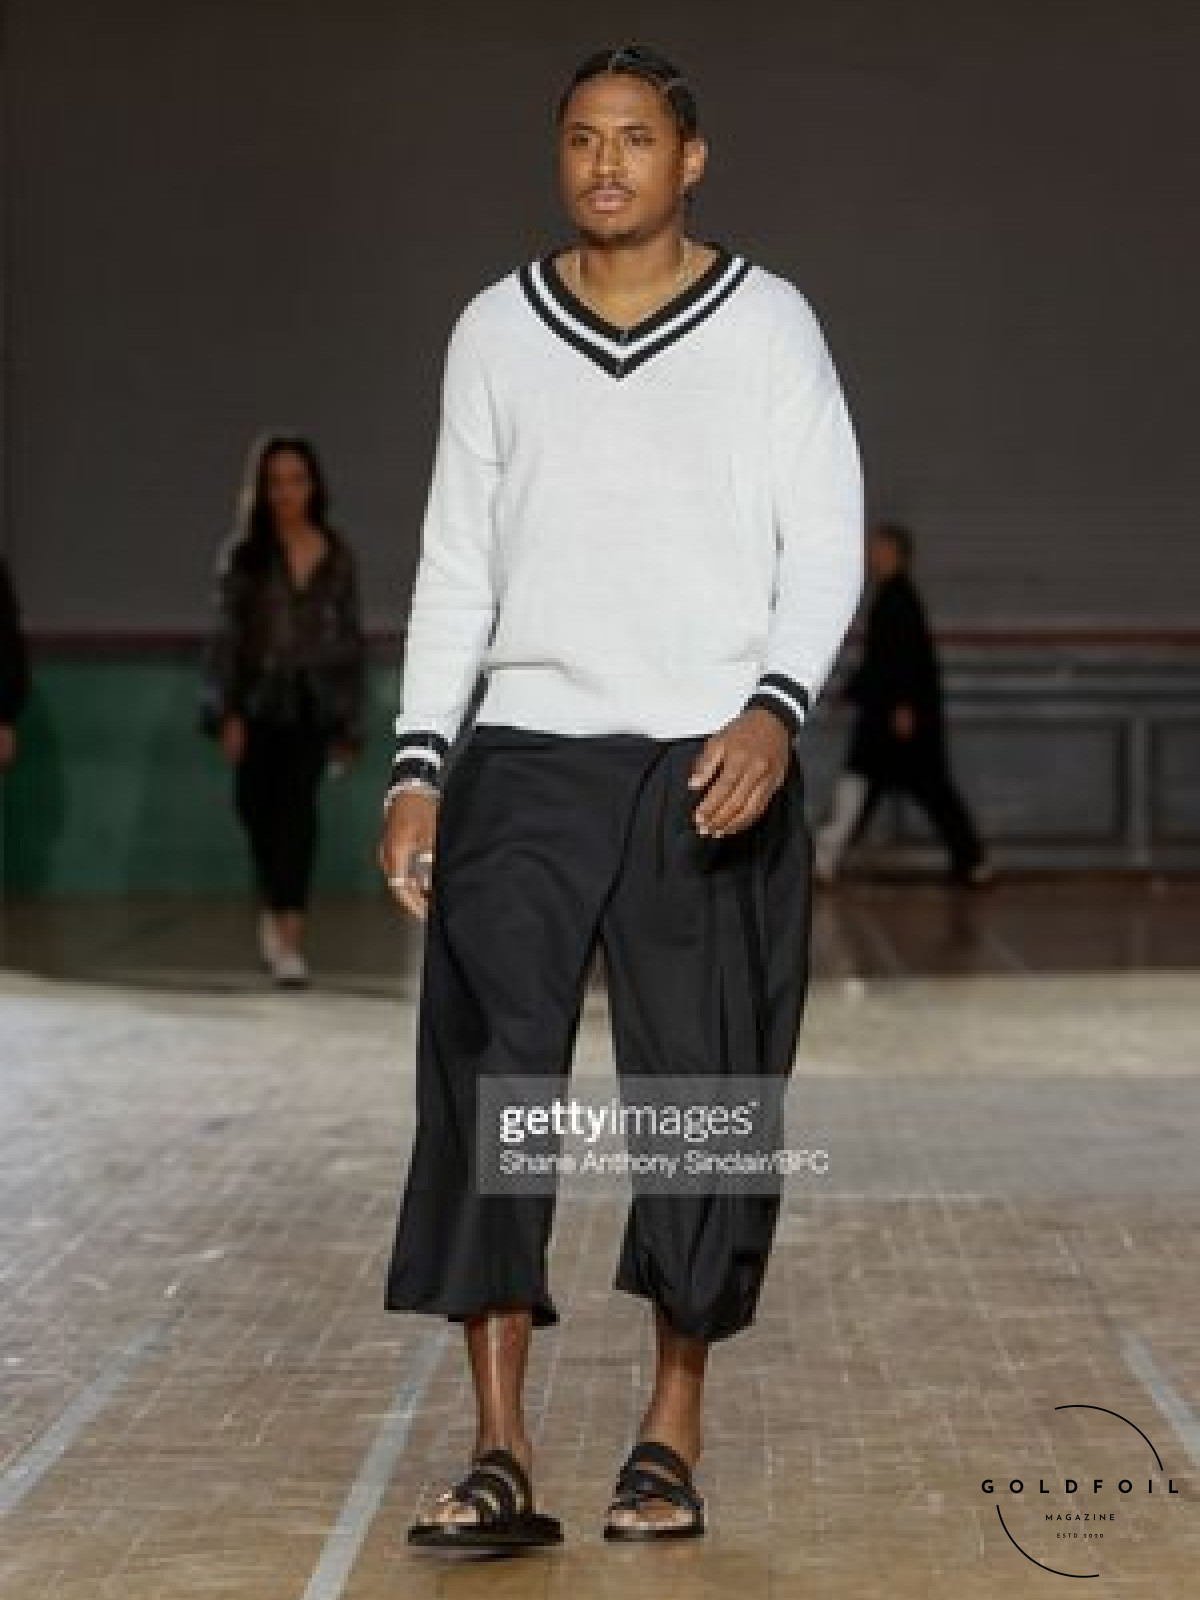 Ishod Wair on the catwalk of Justin Cassin SS23 at London Fashion Week Mens